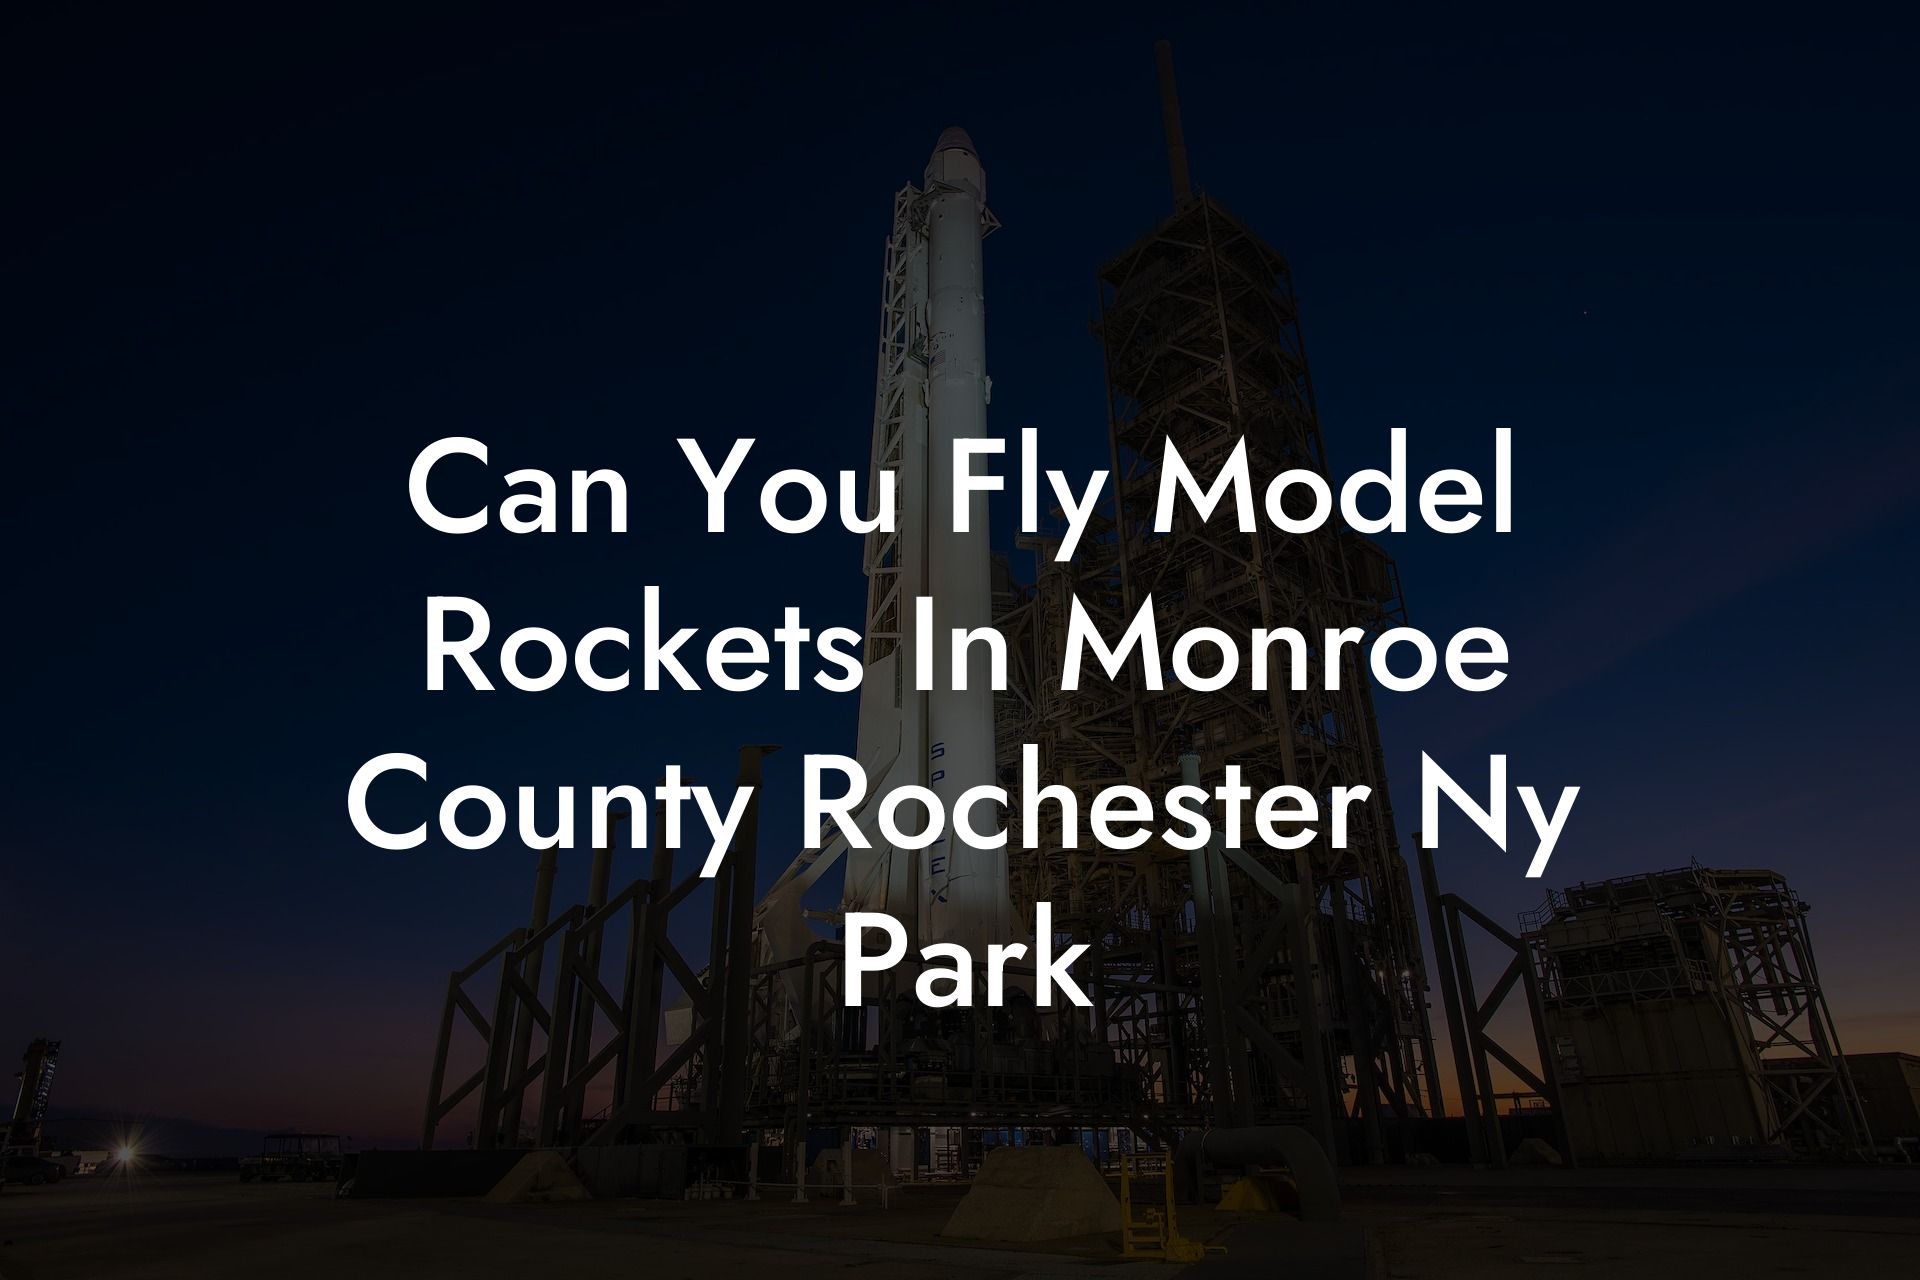 Can You Fly Model Rockets In Monroe County Rochester Ny Park